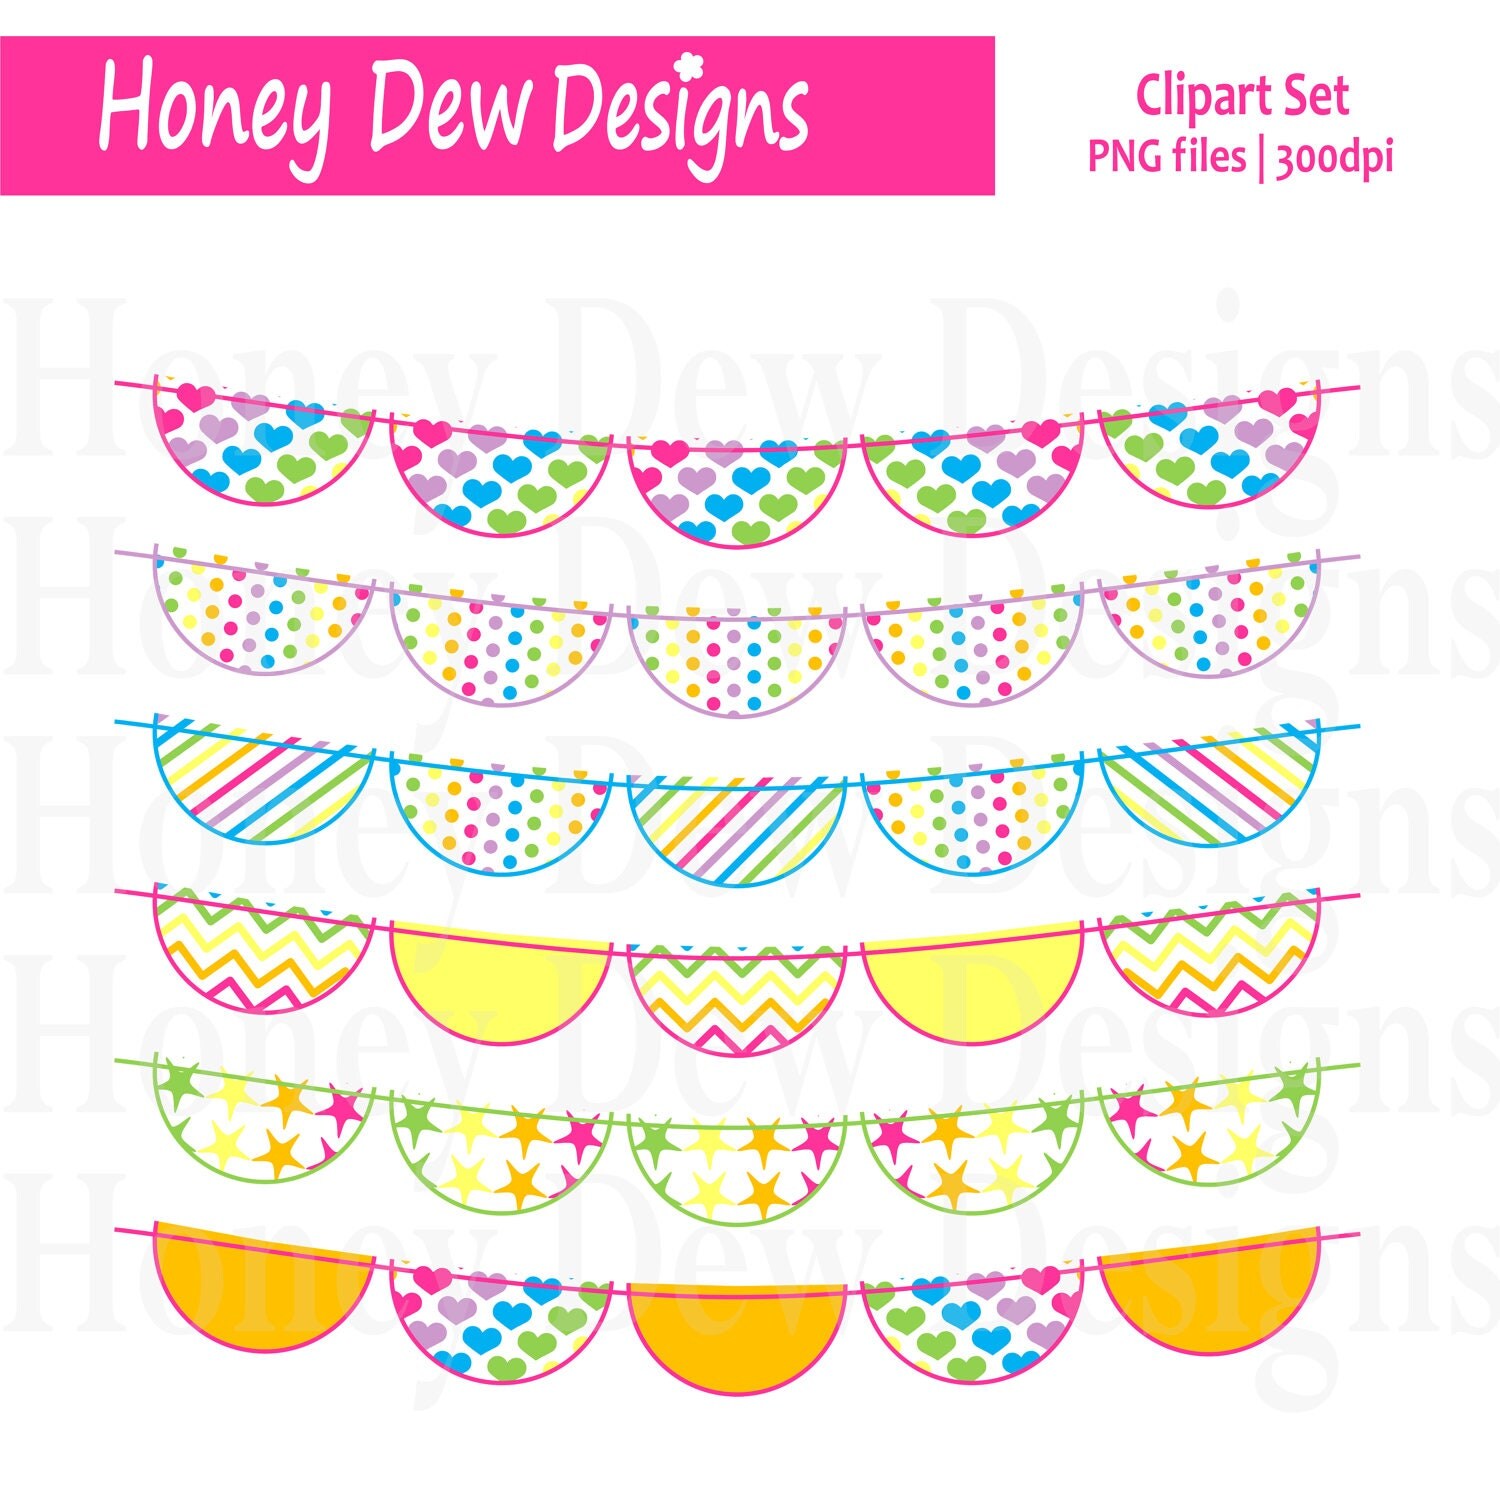 patterned bunting